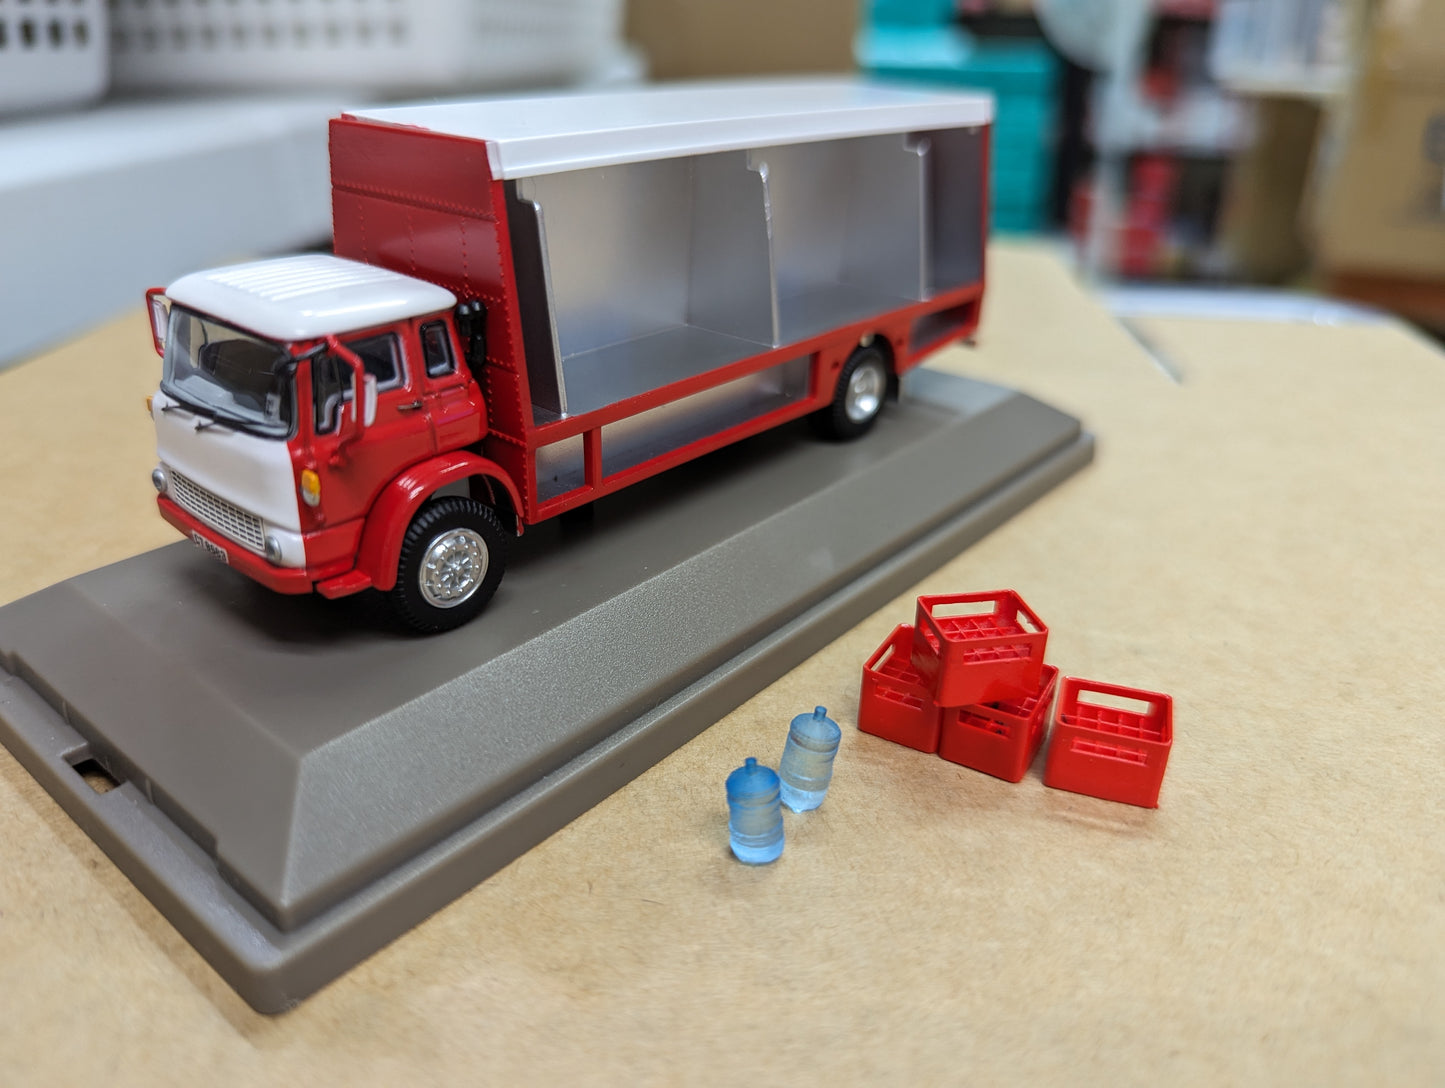 (OPENED BOX) Model1 1/76 Hong Kong 1980's Bedford TK Delivery Truck - CT9589 (T33102)